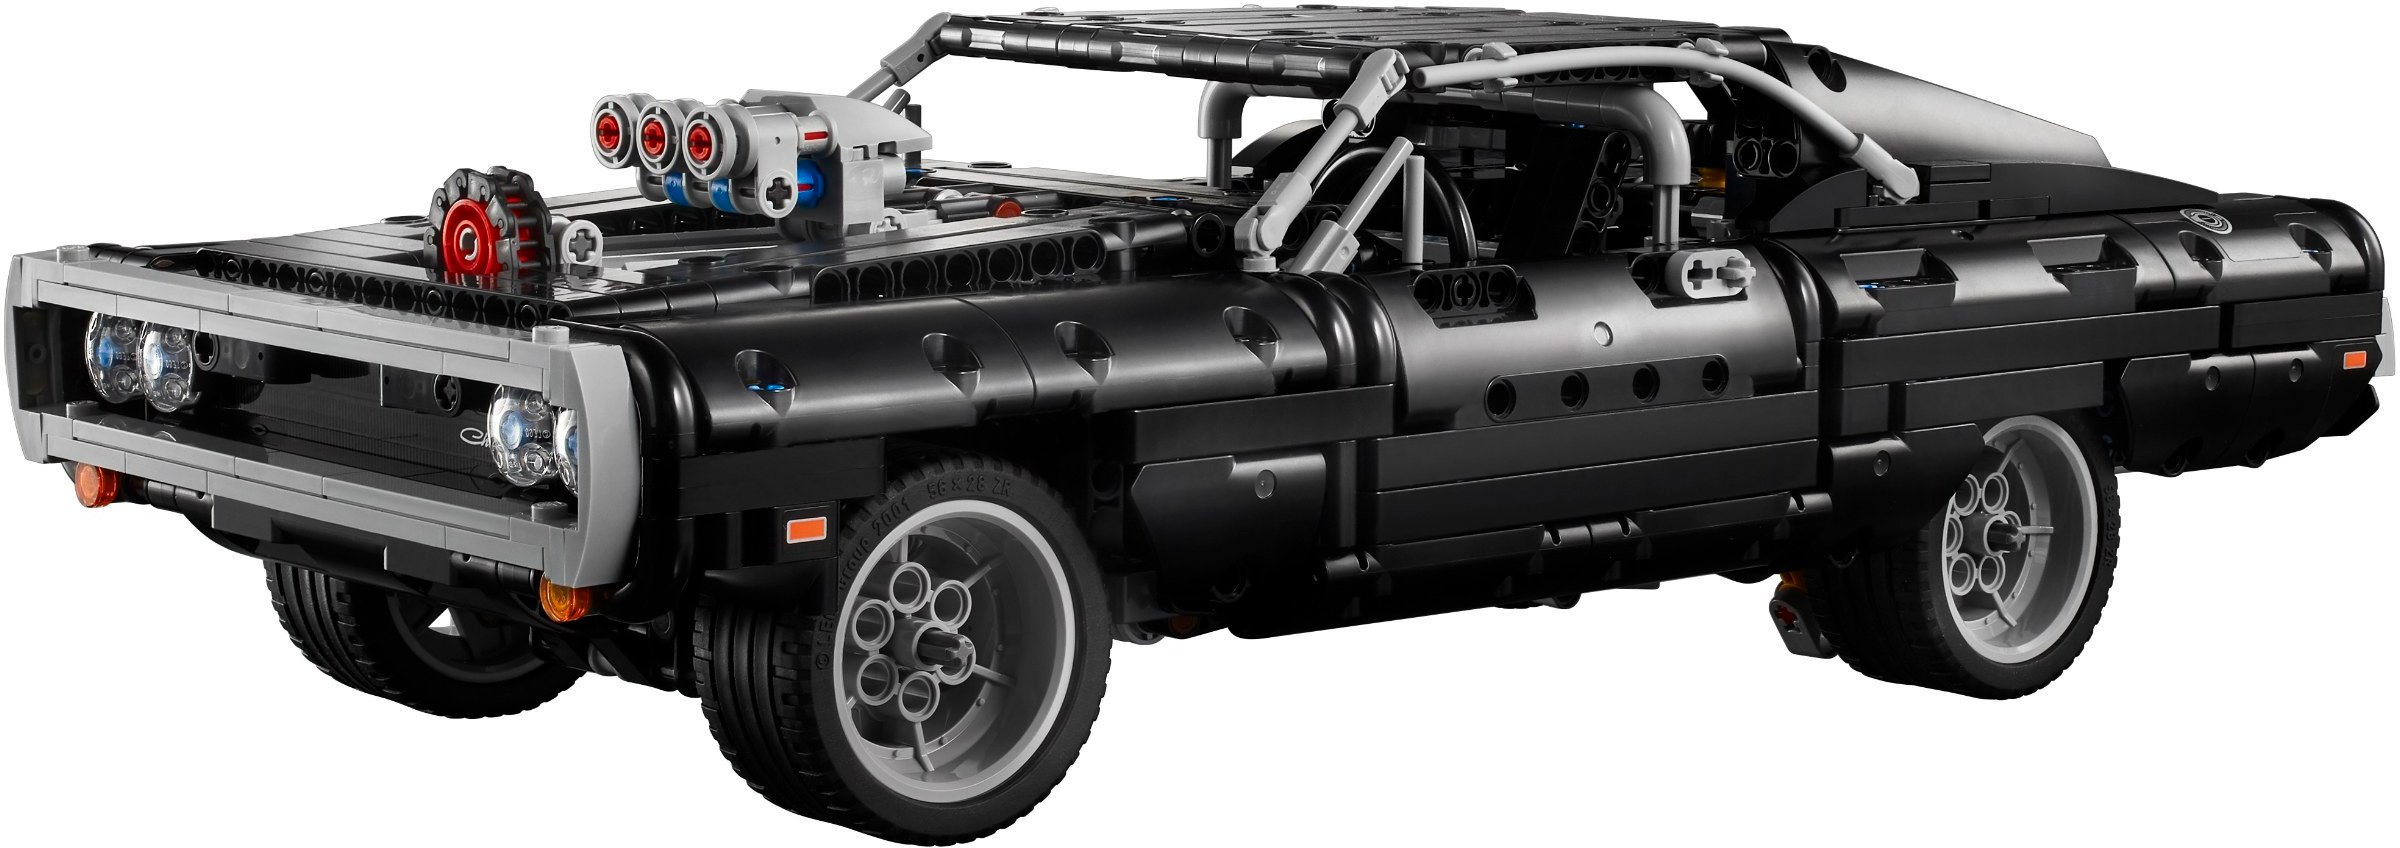 LEGO Technic - Dom's Dodge Charger (42111)